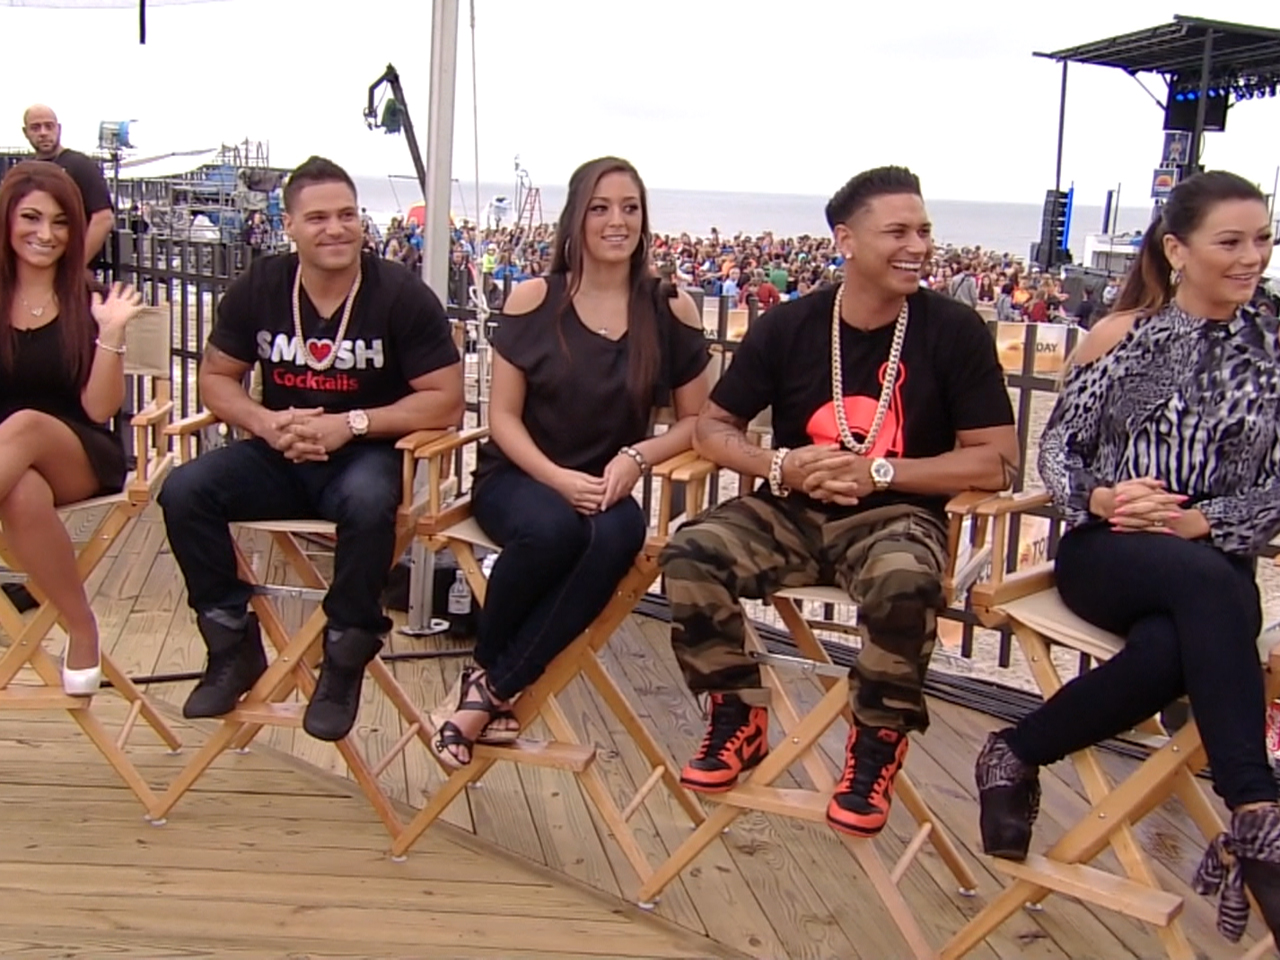 The Jersey Shore cast laughing together, symbolizing their unique and fun slang language